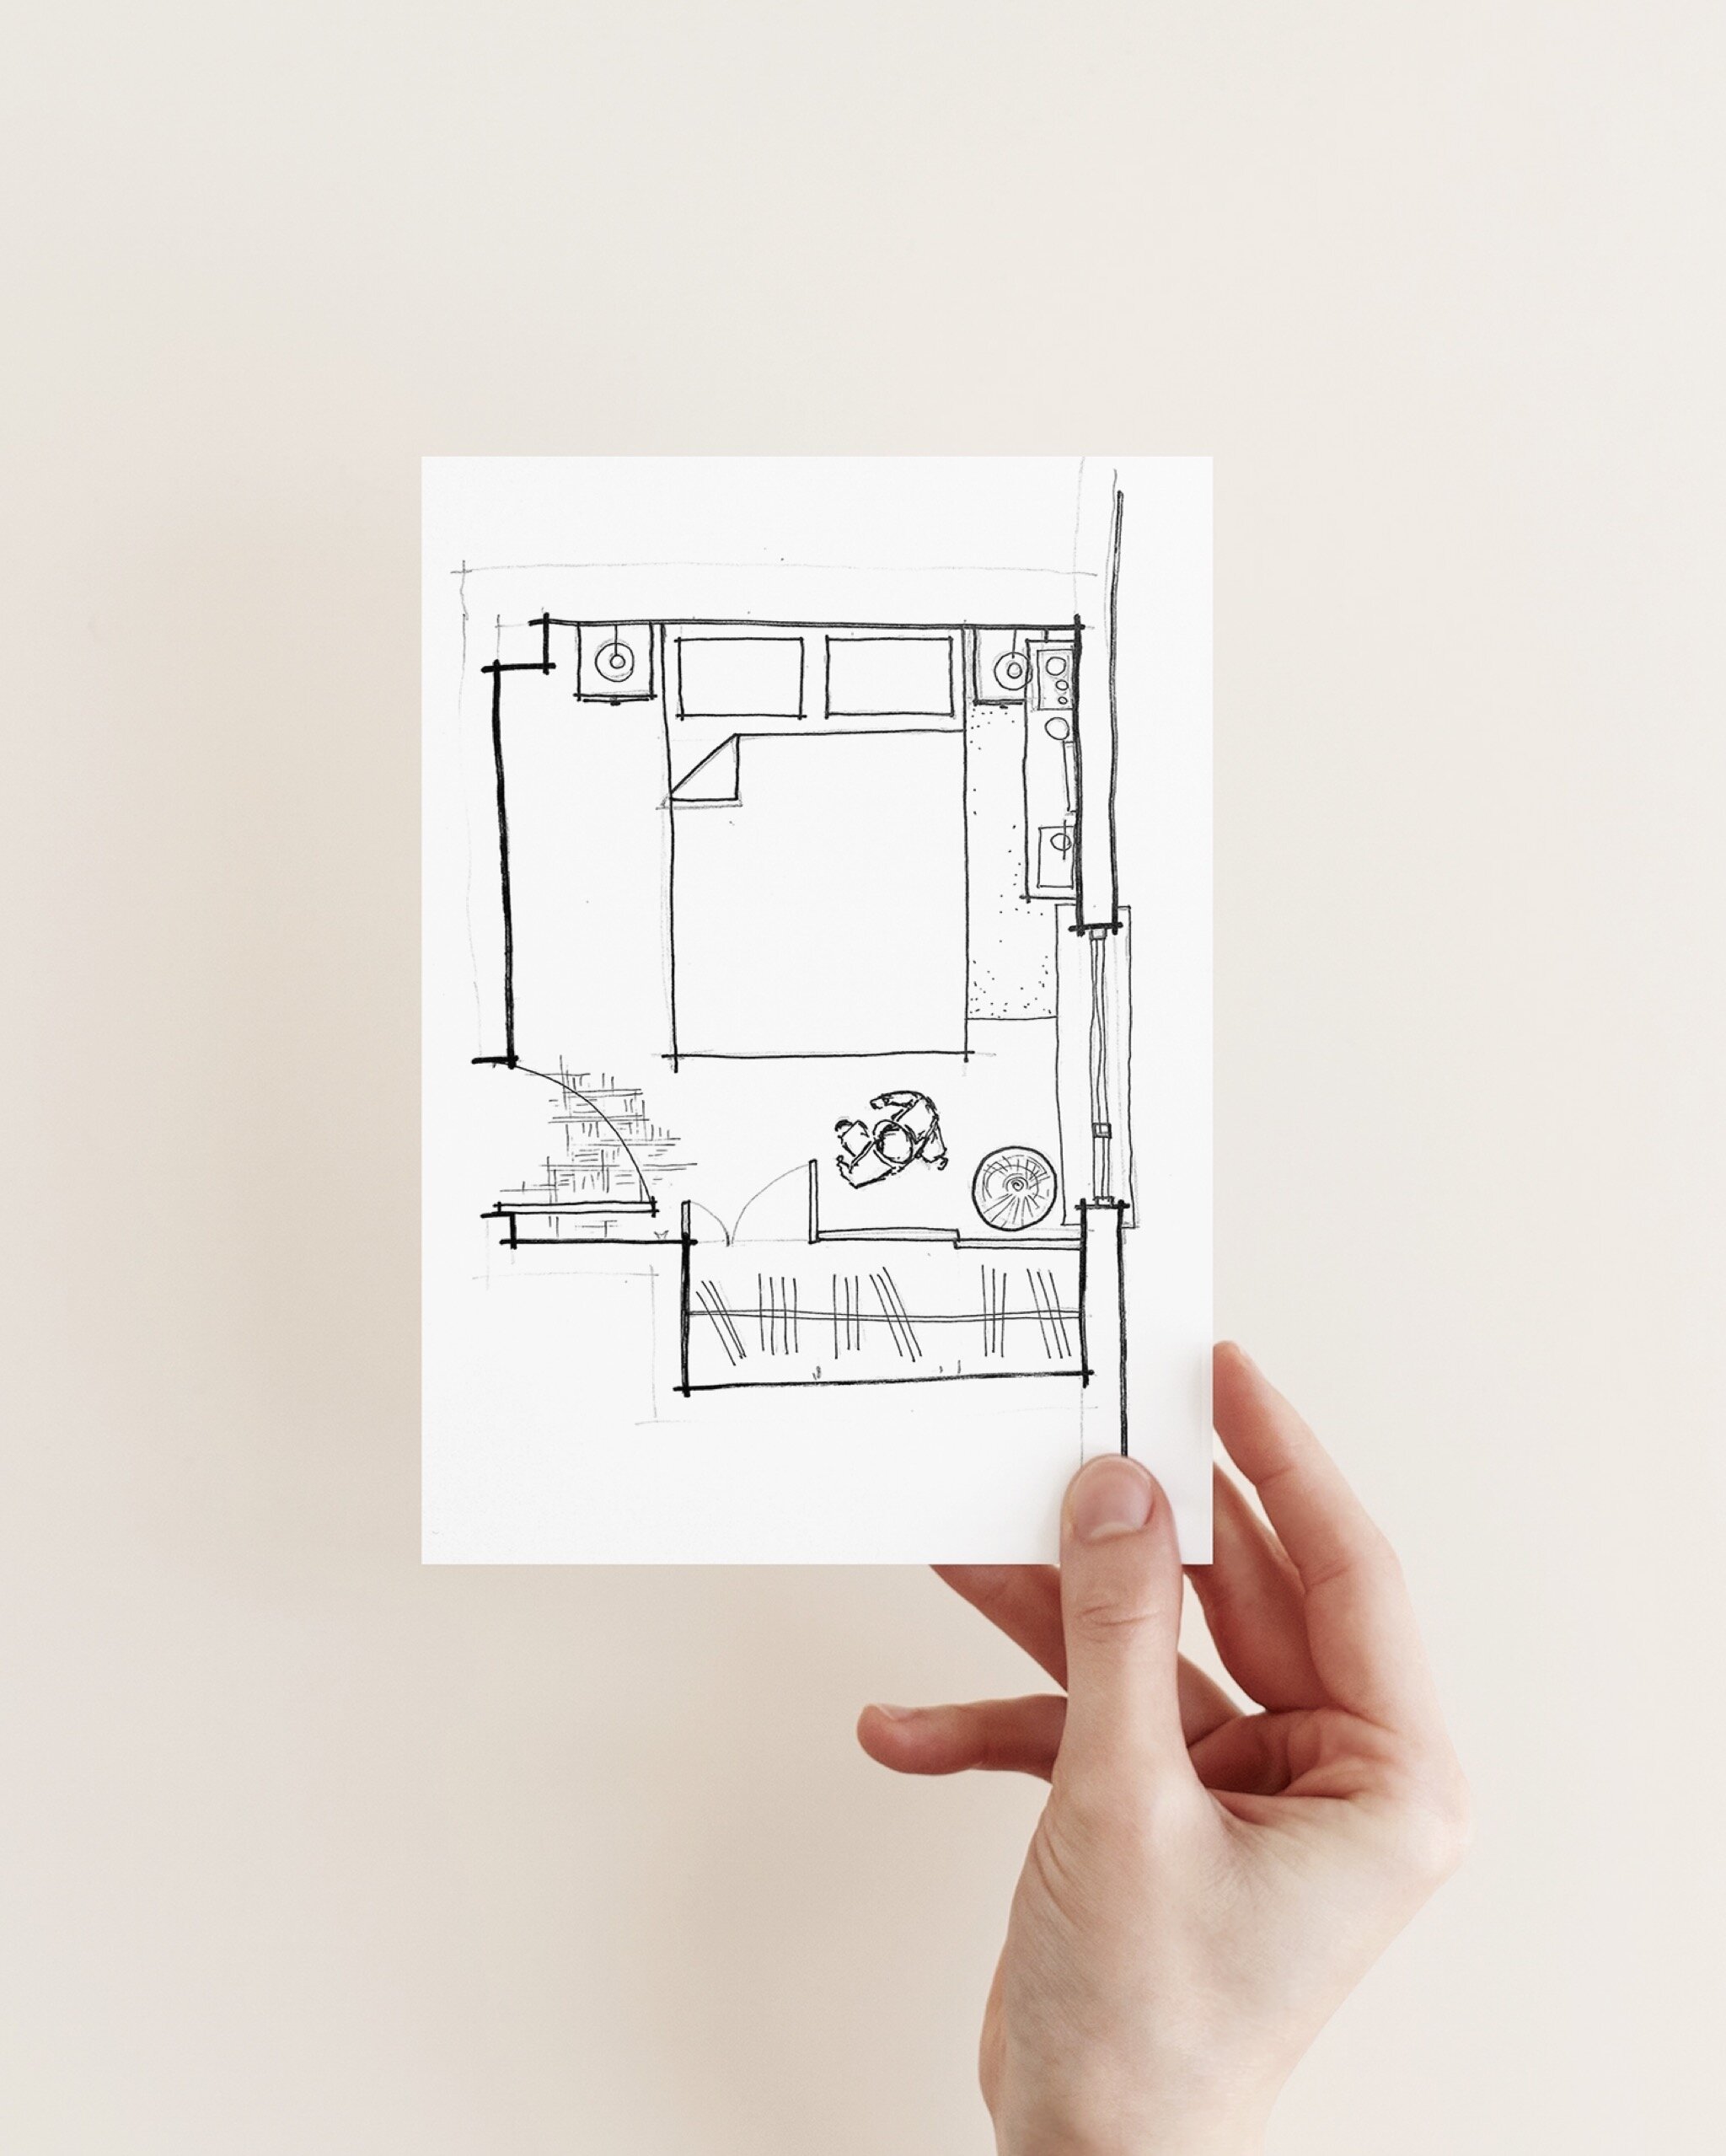 Learn to hand draw a floor plan on skillshare